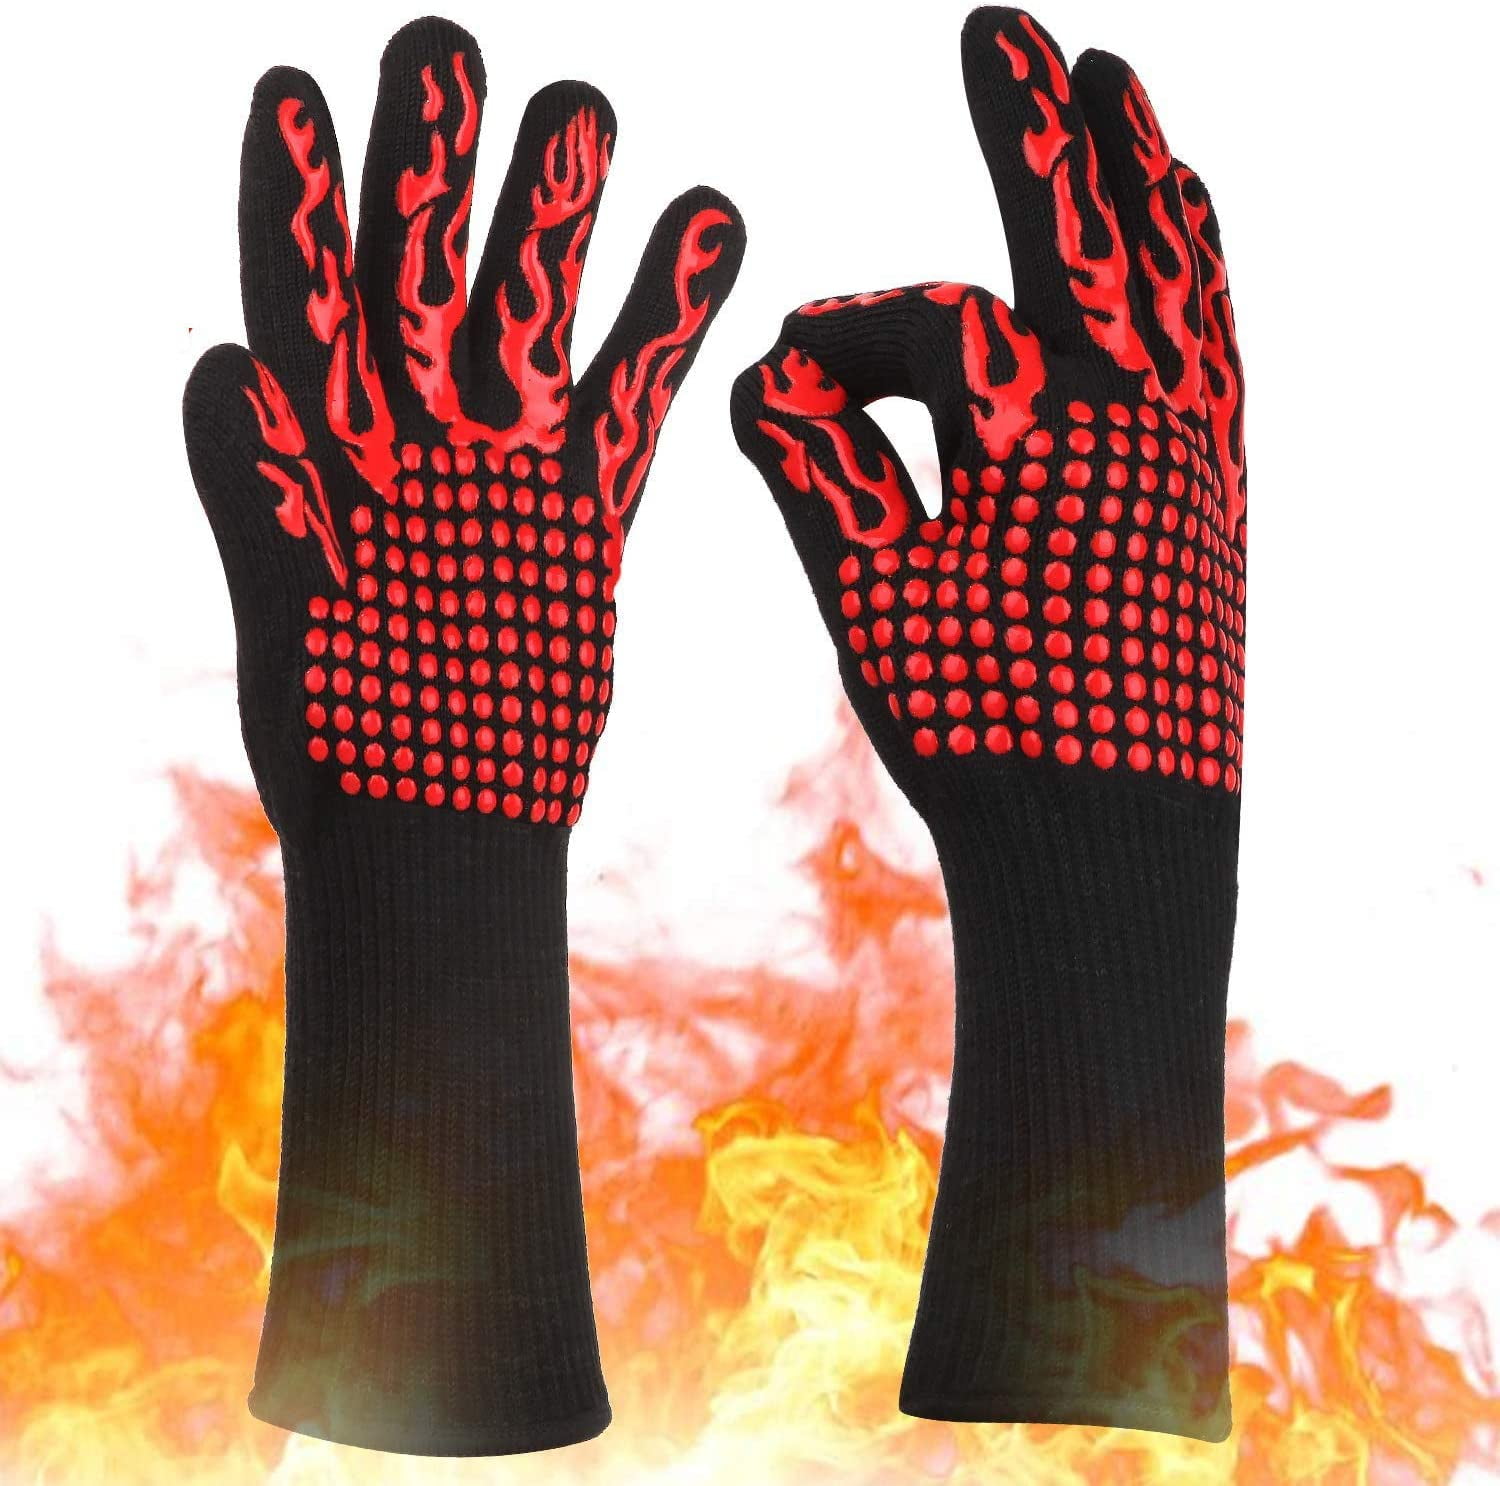 BBQ Heat Resistant Gloves 1472℉ for Women (X-Small) - Heat Proof Grills  Glove with Non-Slip Silicon for Grilling , Cooking and Baking - Mitts for  Oven